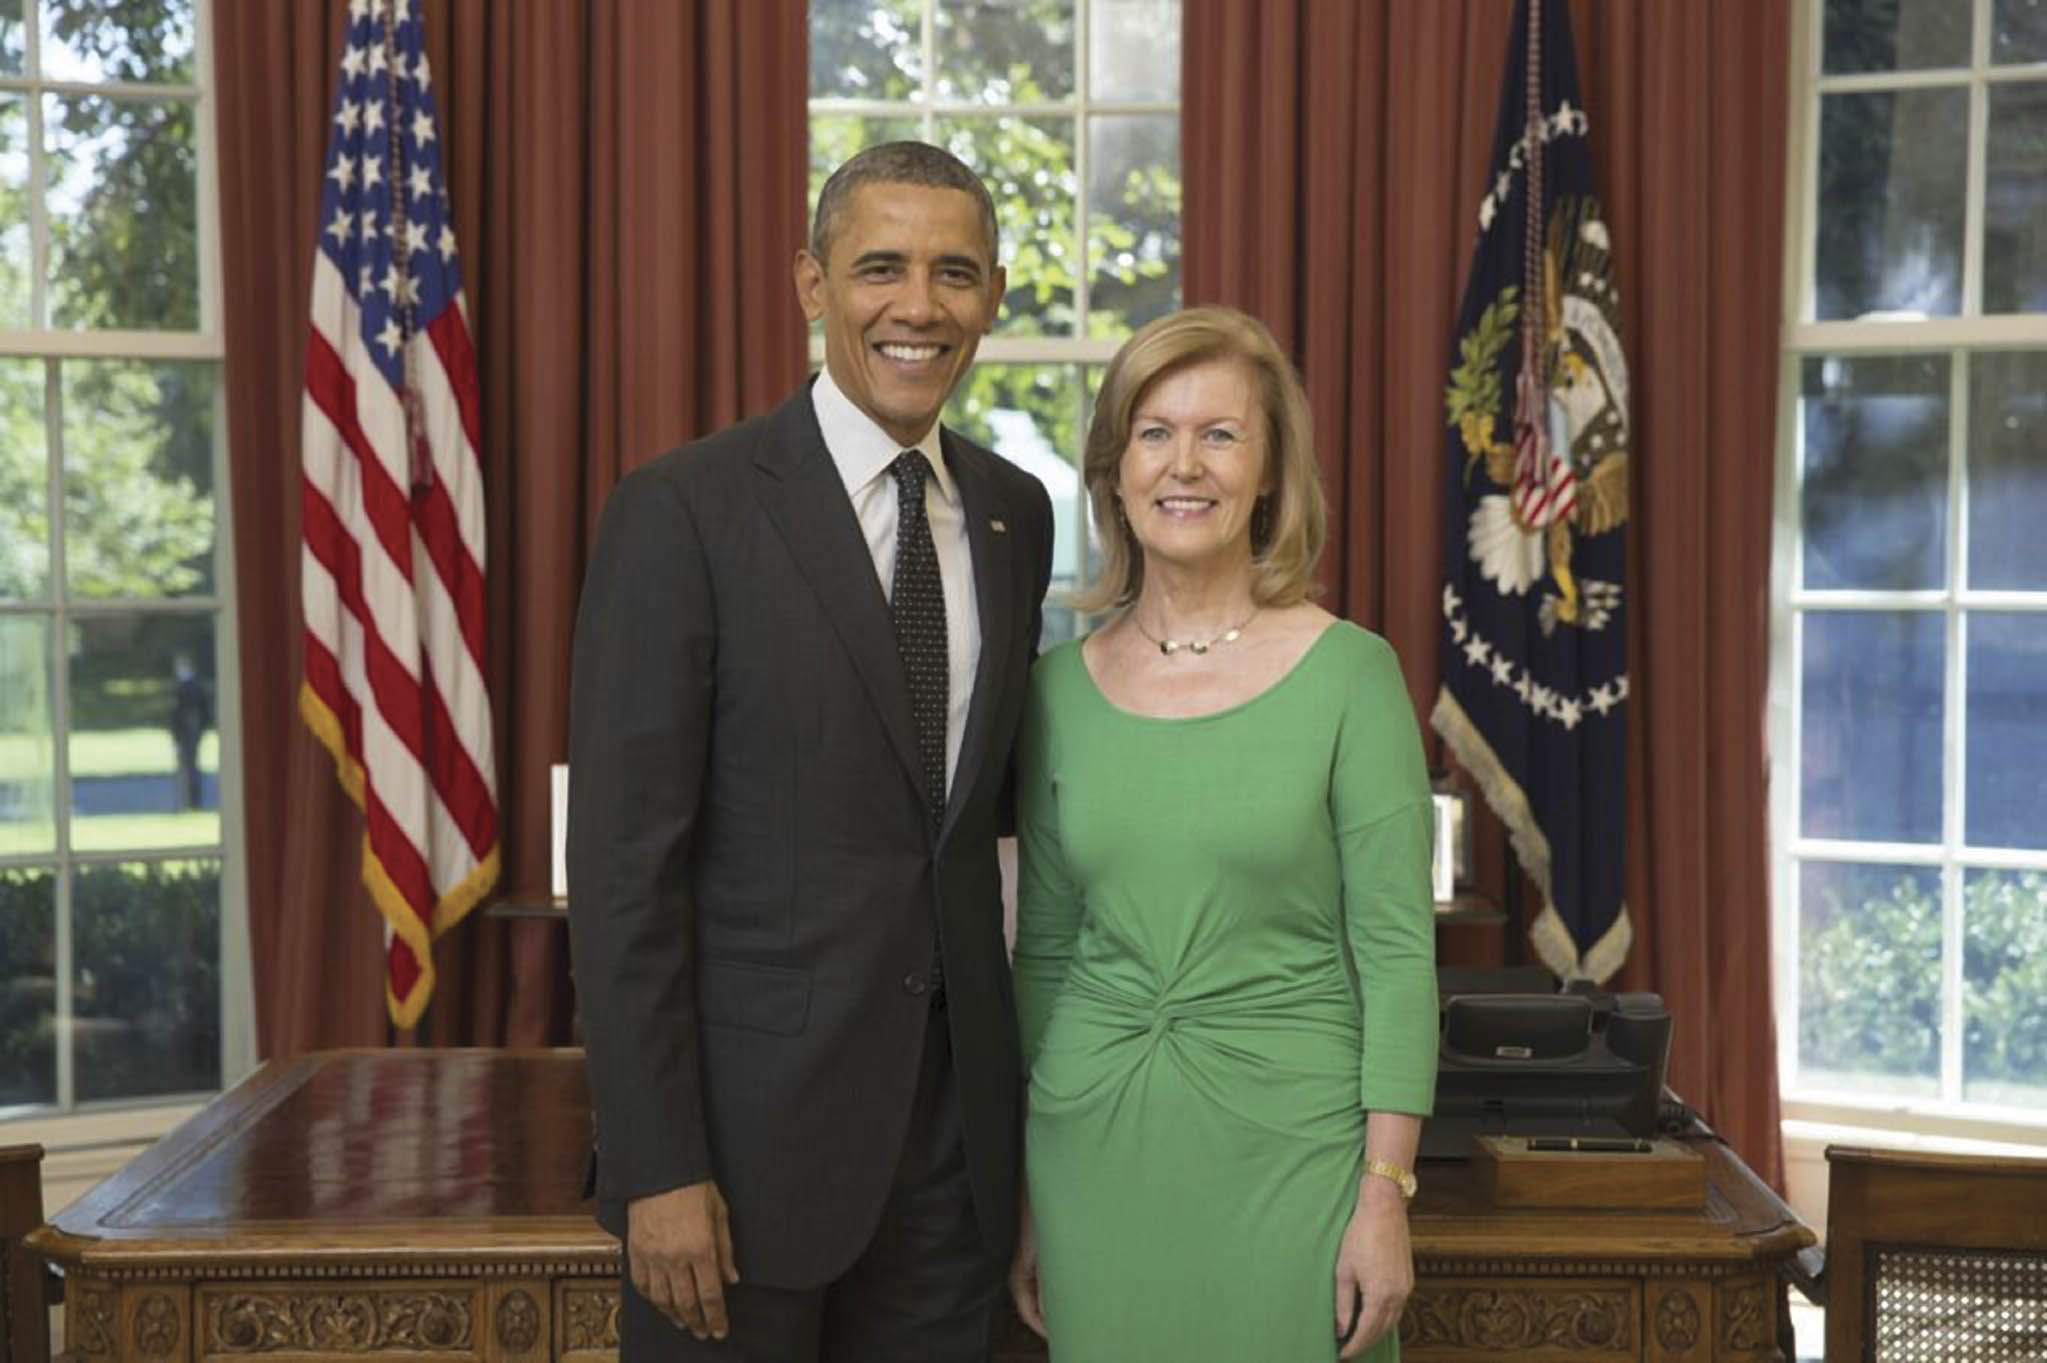 Anne Anderson presented her credentials to President Barack Obama on assuming the position of Ireland’s  Ambassador to the U.S. (Photo: White House / Lawrence Jackson)